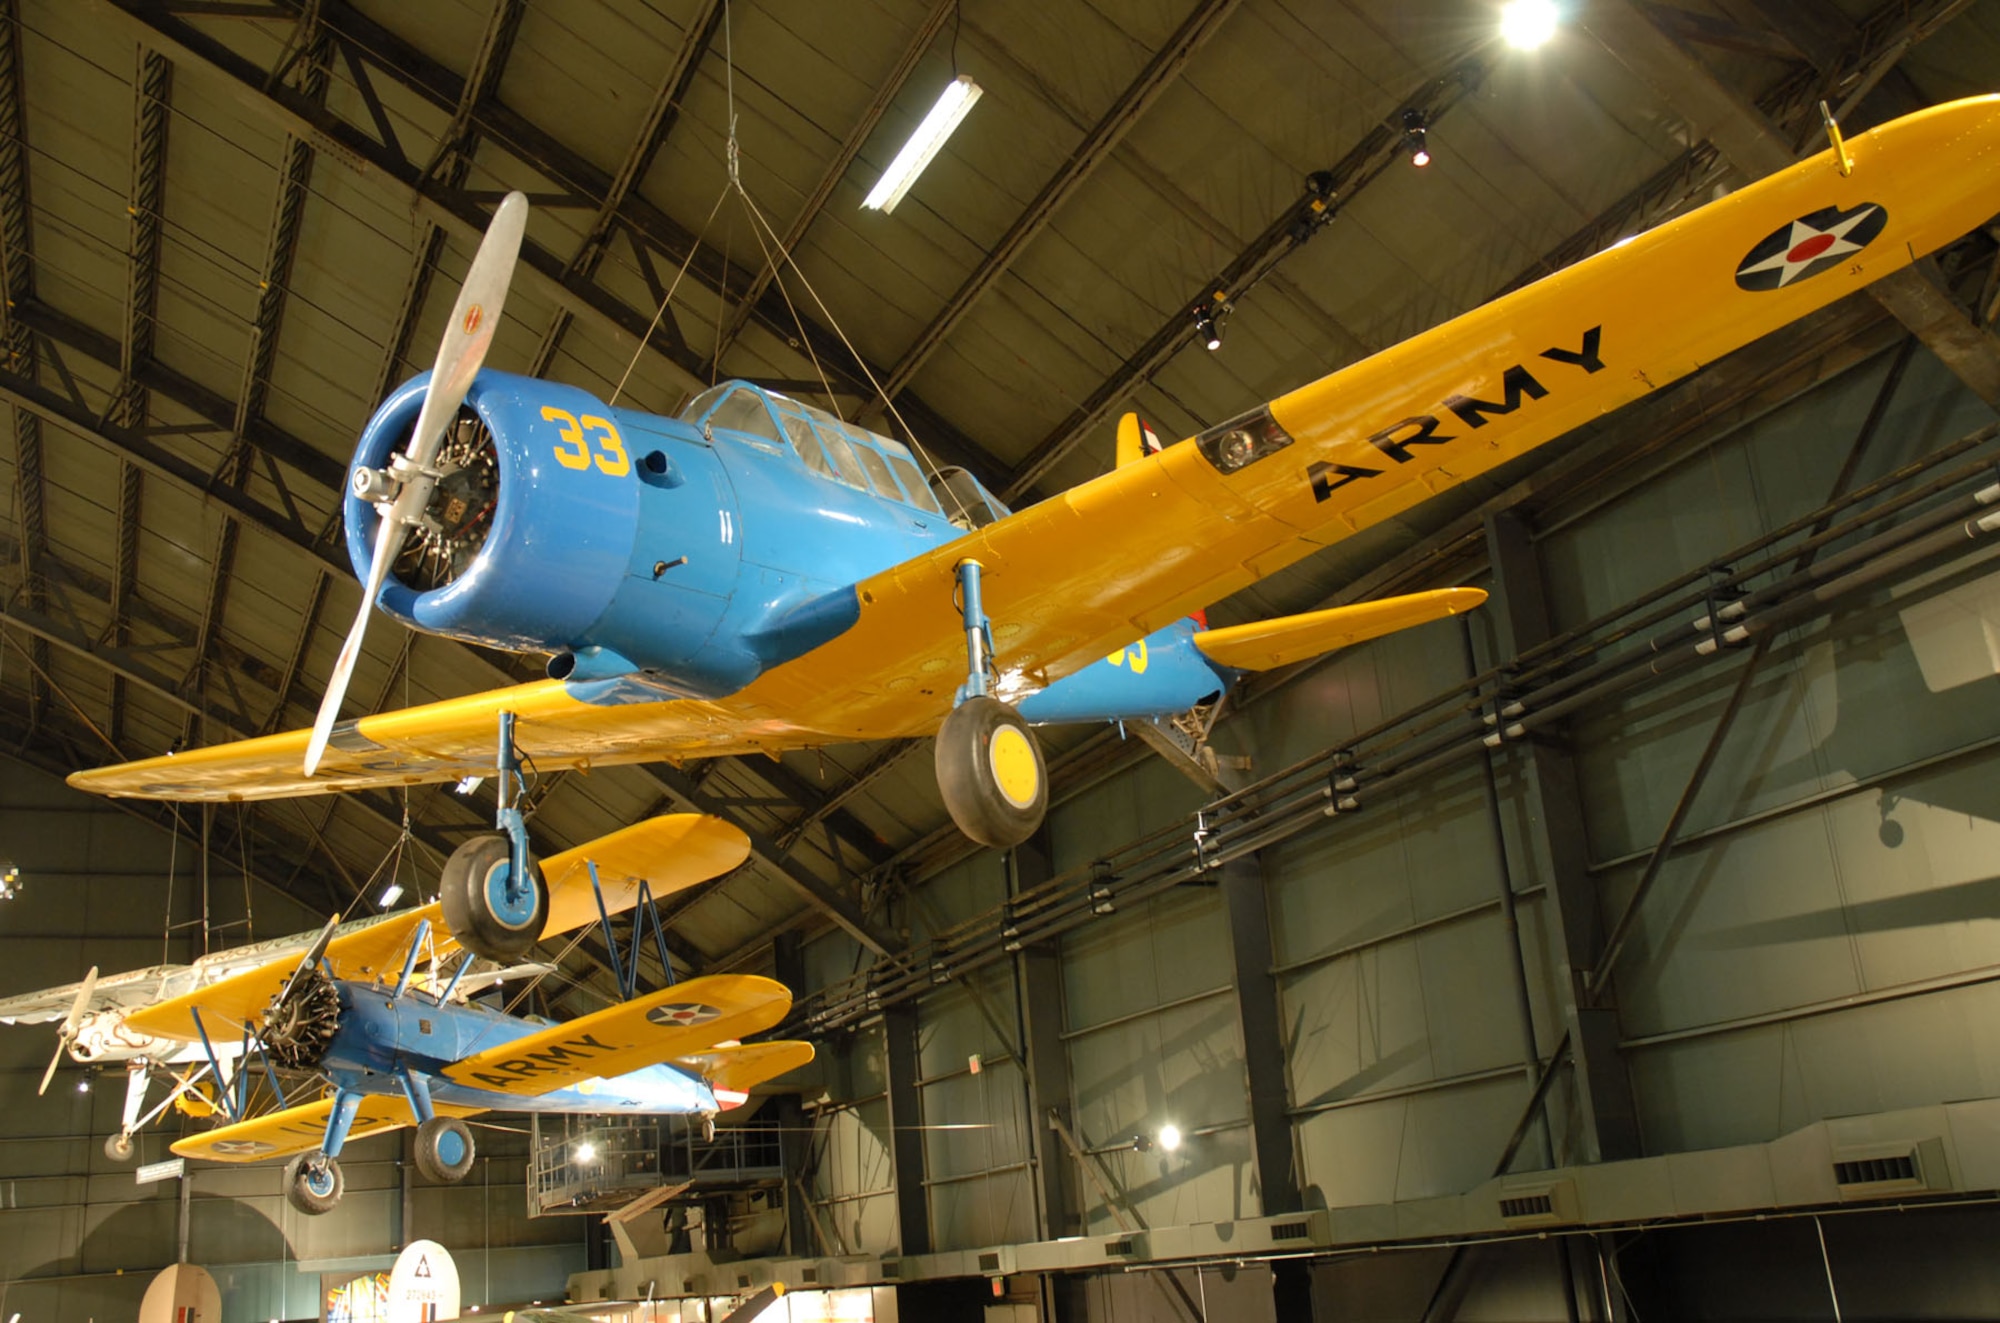 DAYTON, Ohio -- Vultee BT-13B Valiant (foreground) and Stearman PT-13D Kaydet in the World War II Gallery at the National Museum of the United States Air Force. (U.S. Air Force photo)